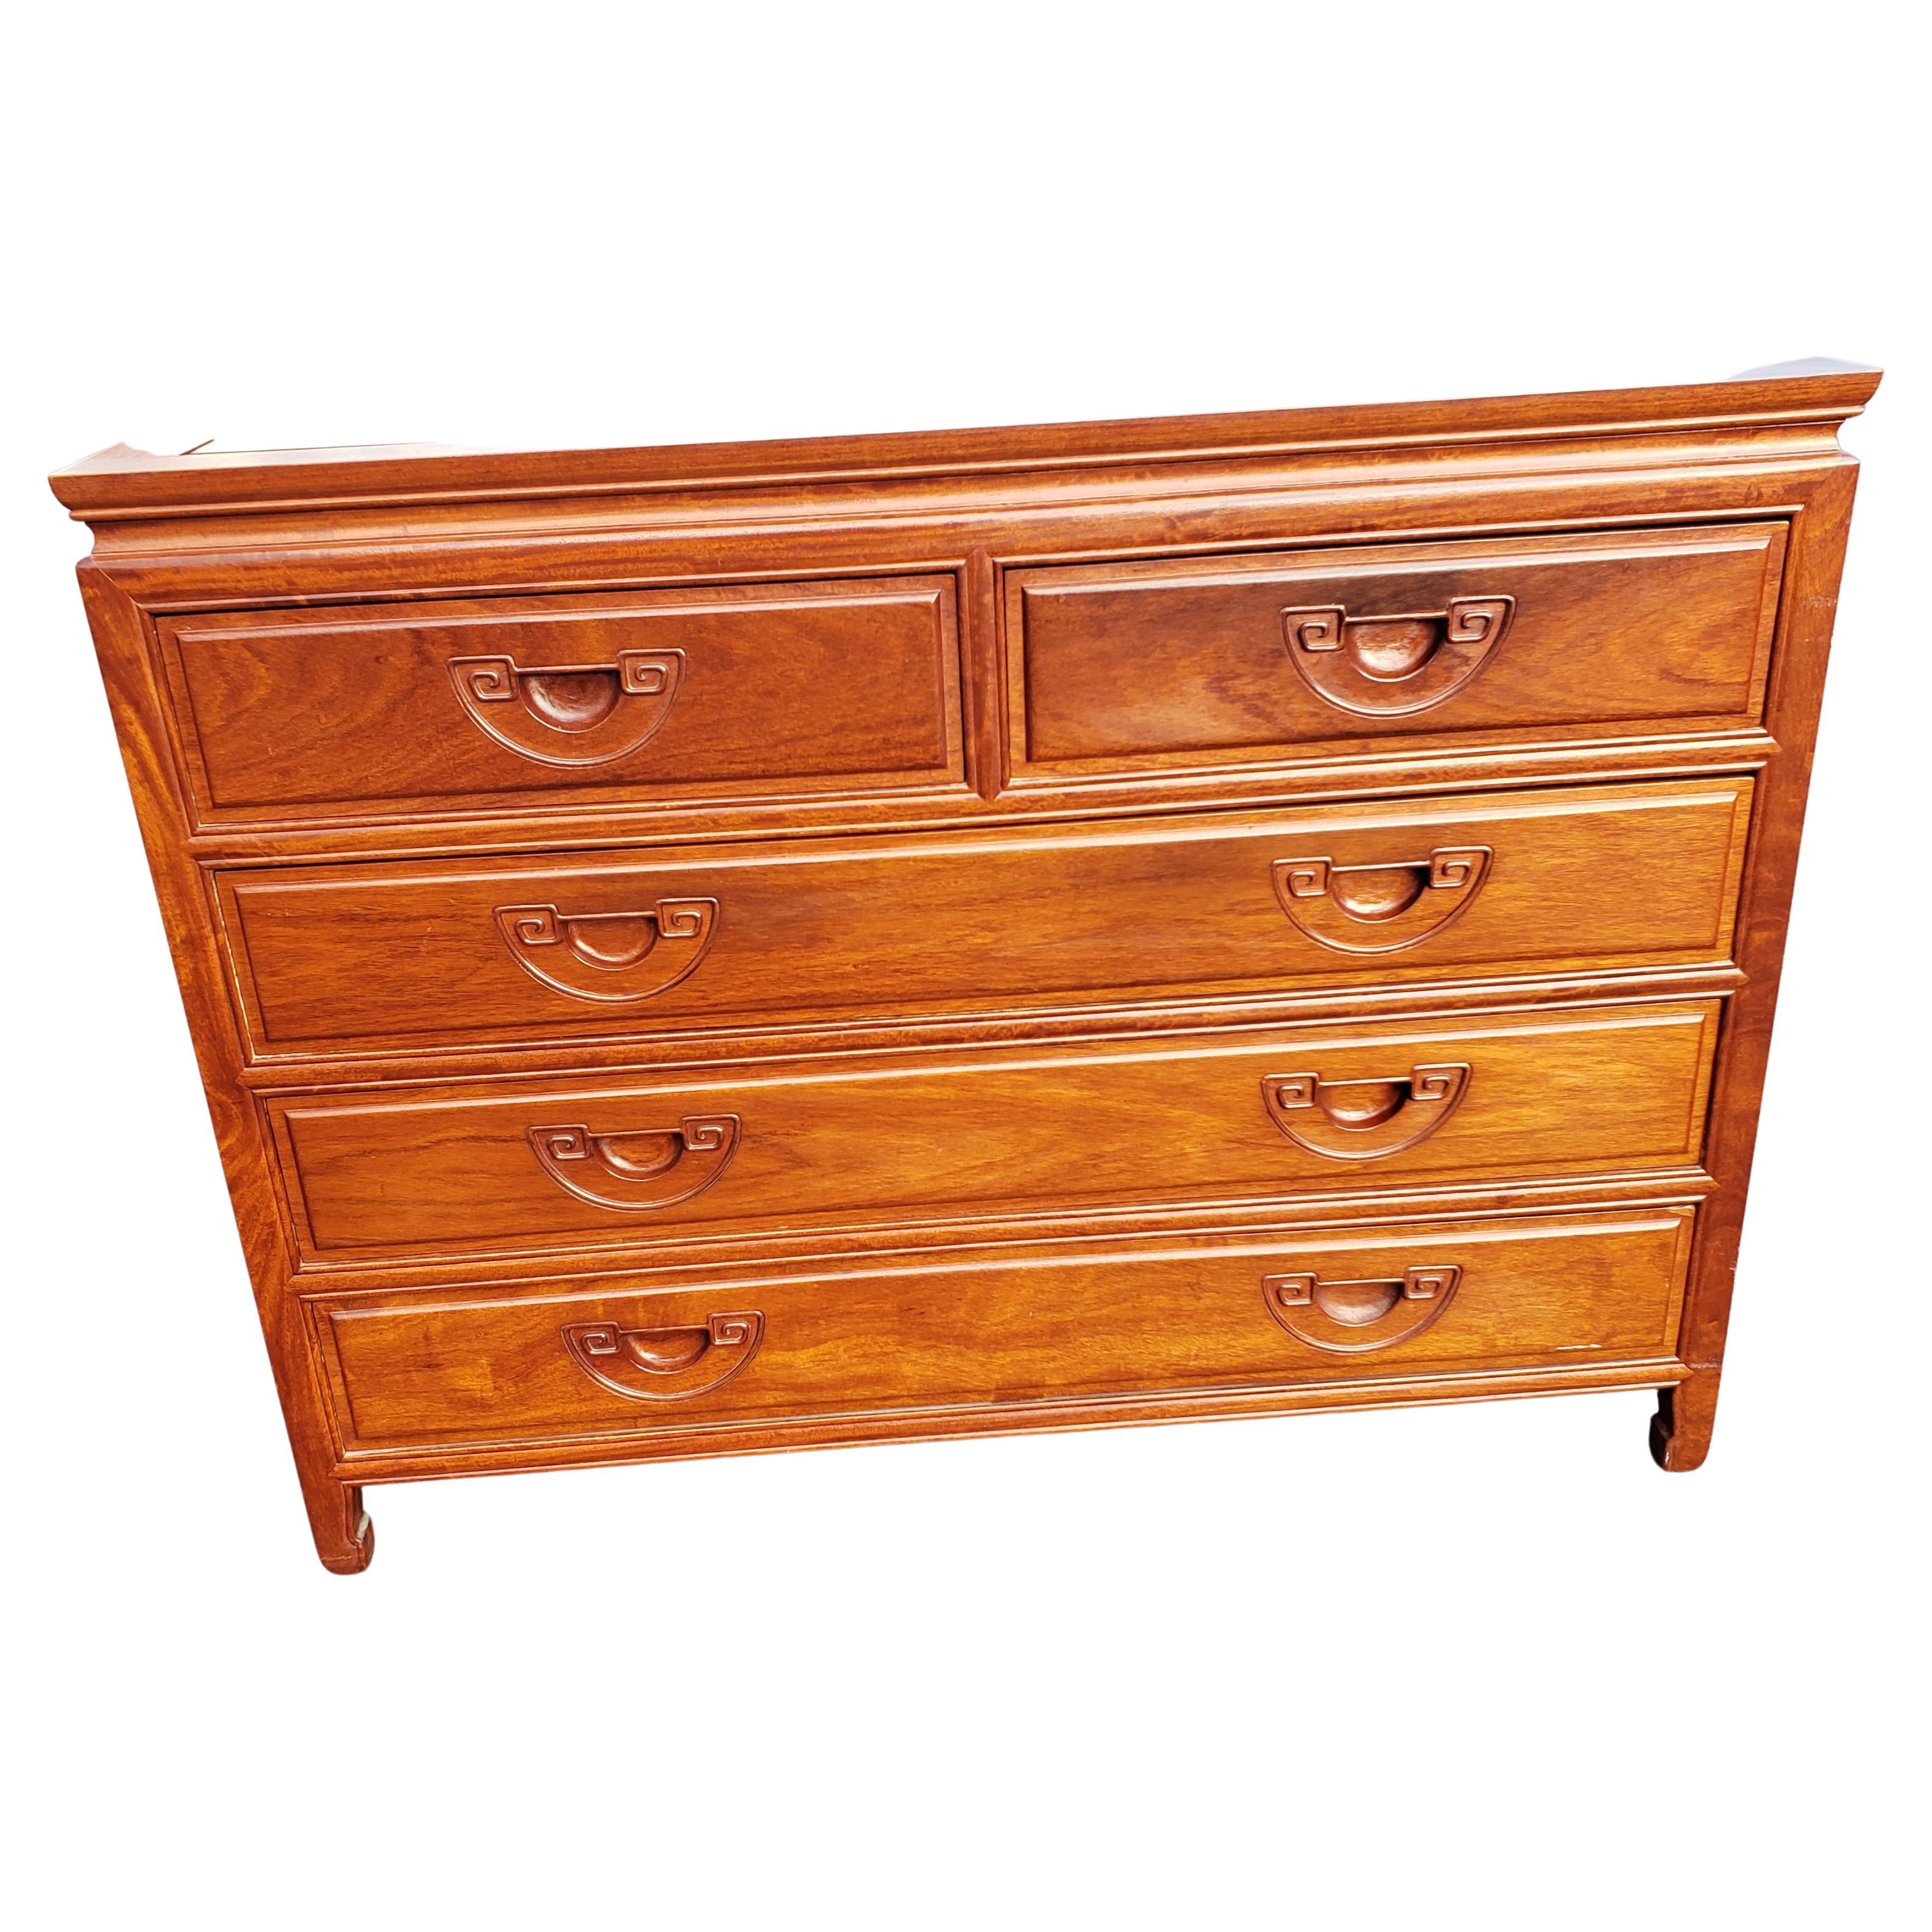 George Zee rosewood hand crafted commode / dresser / chest of drawers with integrated carved handles. Very good condition. All dovetailed drawers. Finished on all sides, inside out. 
Whse Kiki temp.

 